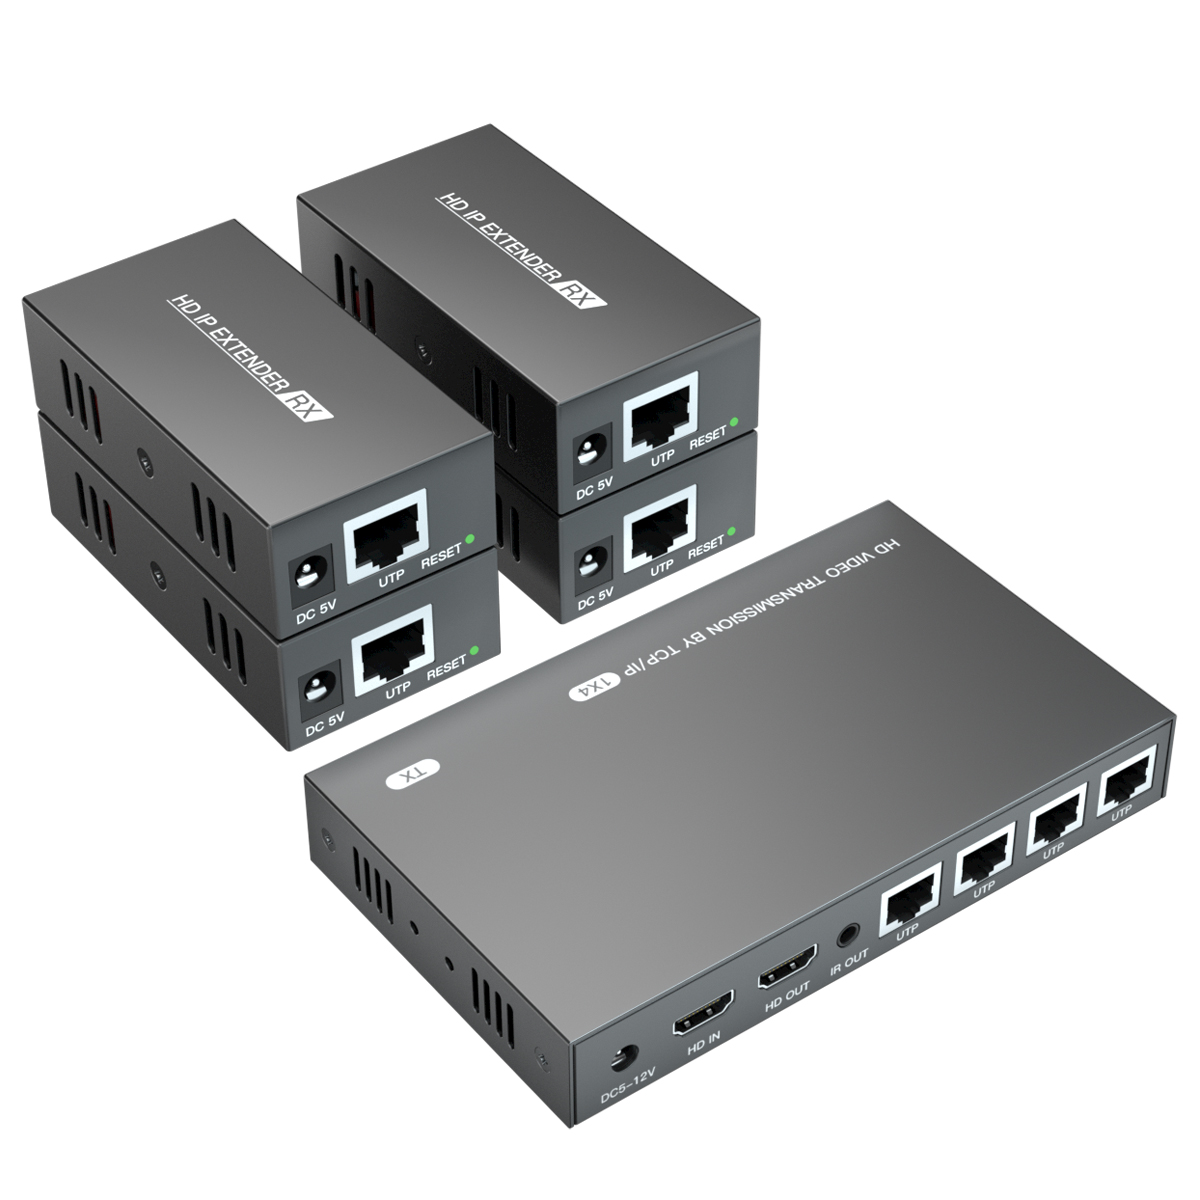 One-to-many HDMI Extender Over IP